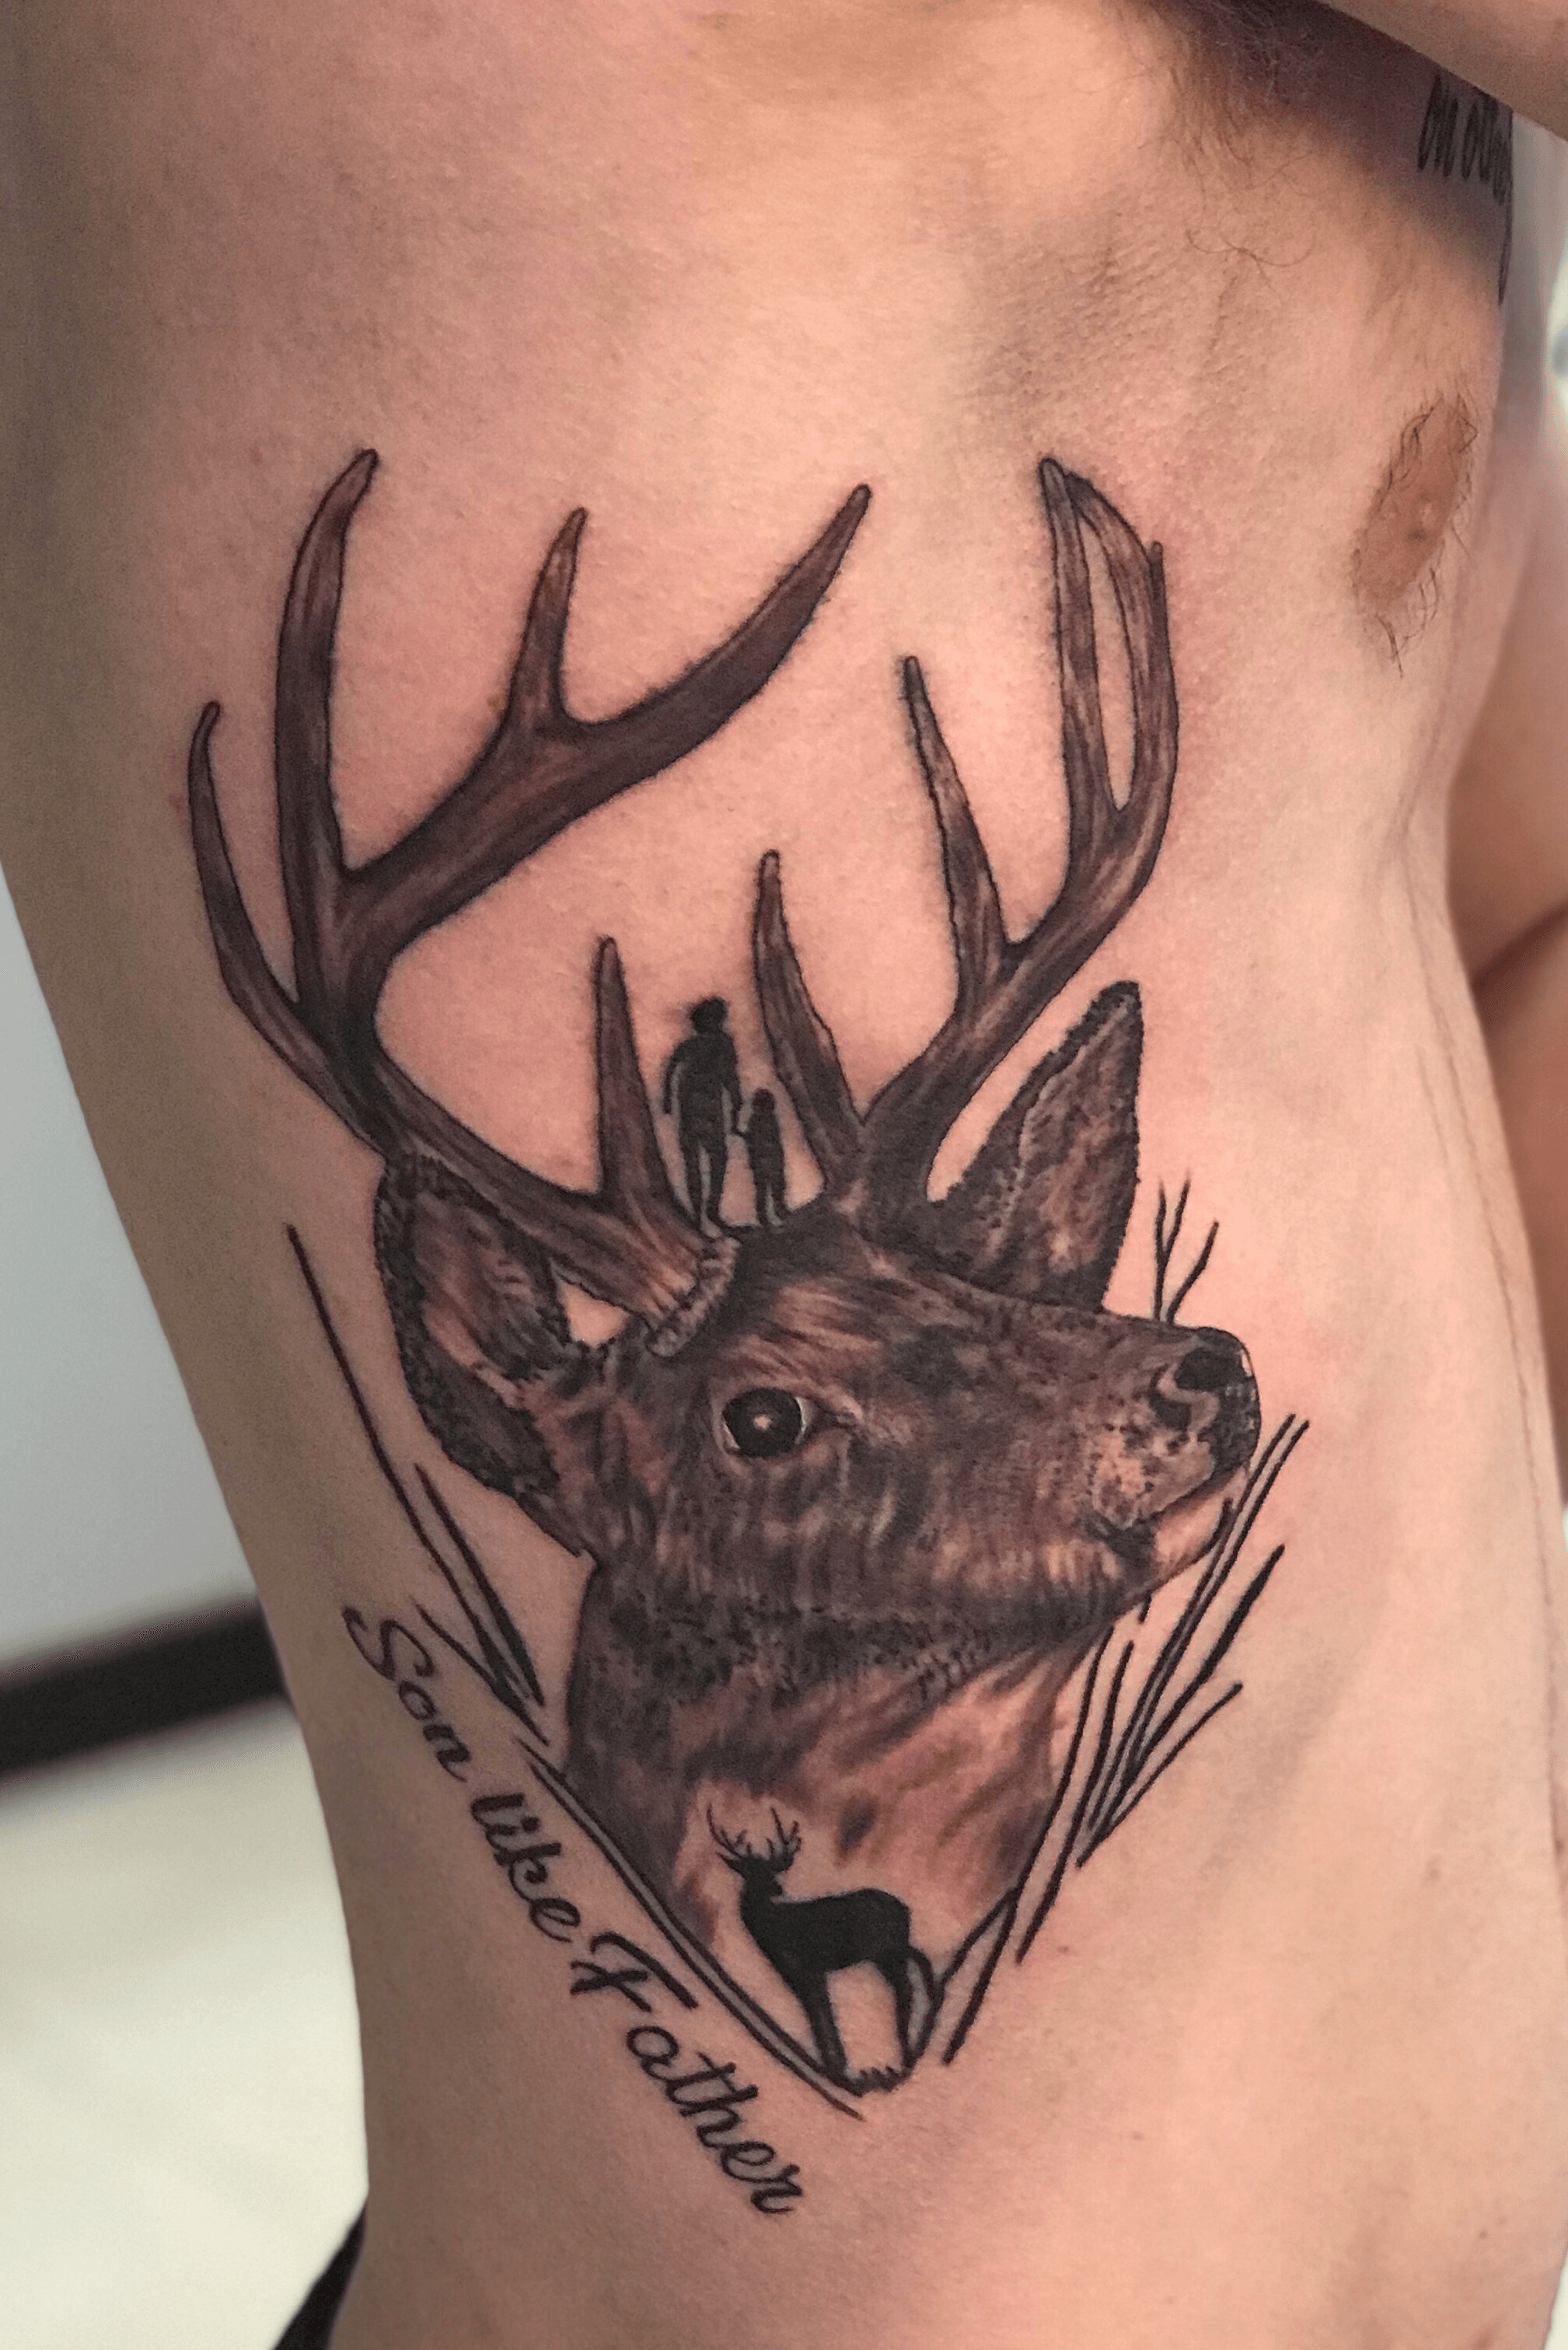 Black and grey realism custom PNW hunting elk fishing father son outdoors  camping mountain forest sle  Tattoo sleeve men Best sleeve tattoos Full  sleeve tattoos